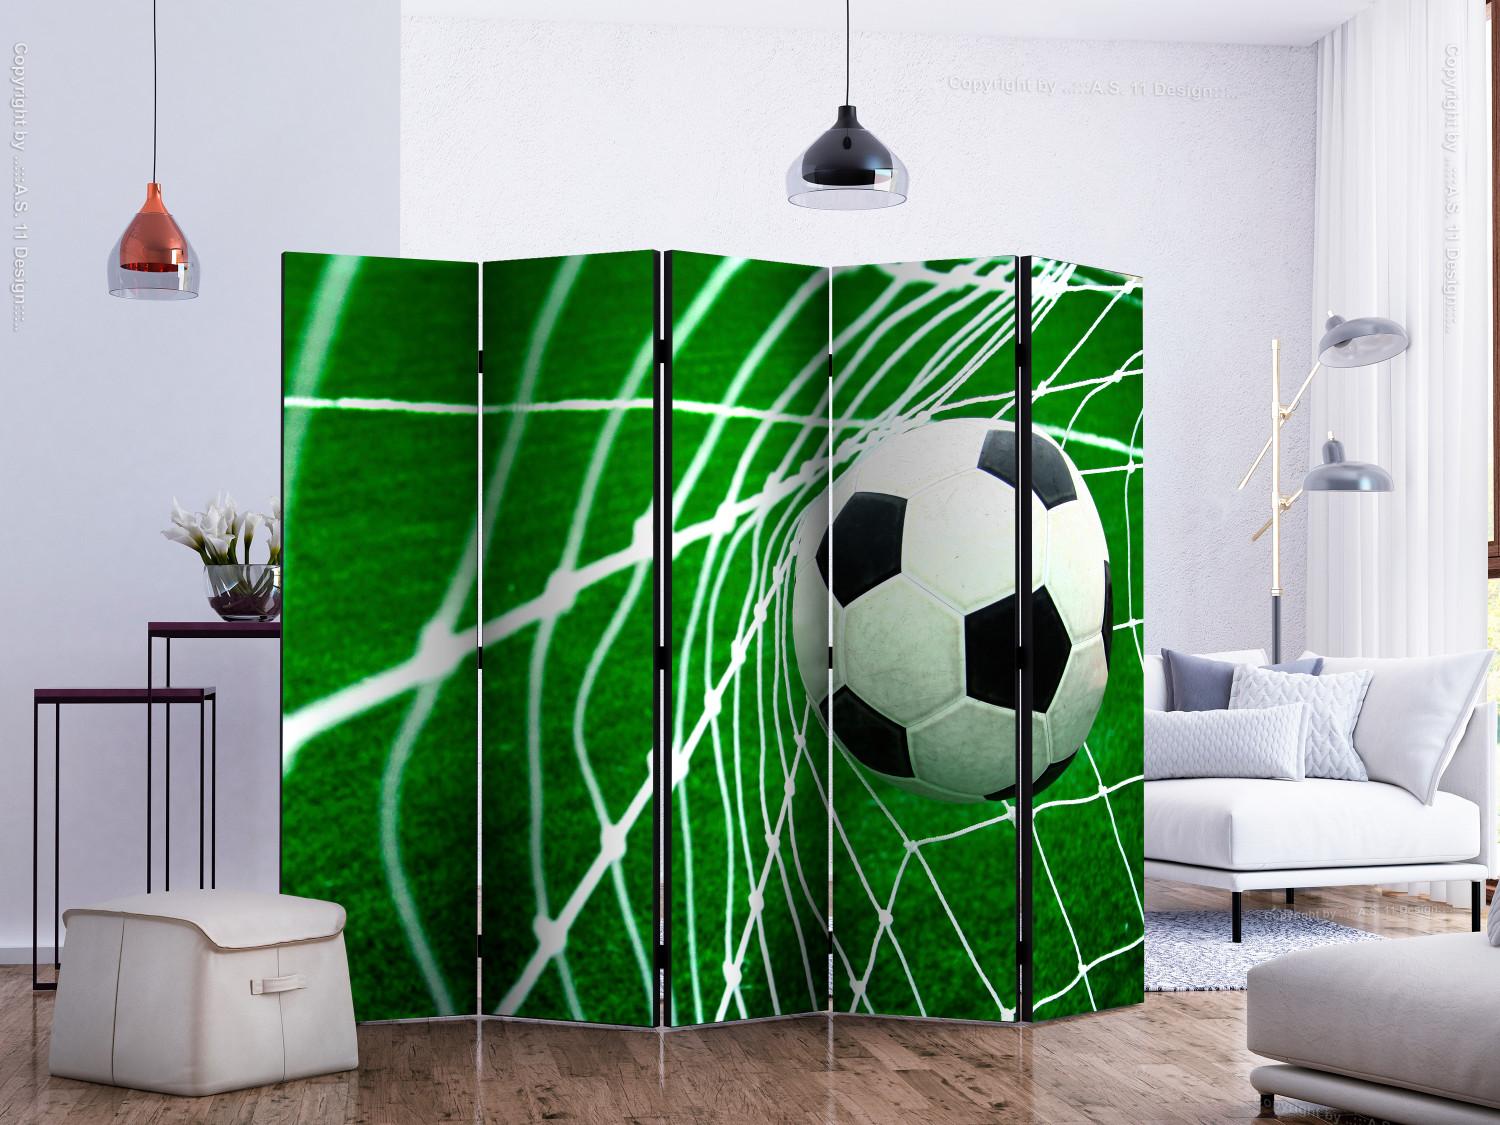 Room Divider Goool! II (5-piece) - soccer ball against a white net and turf